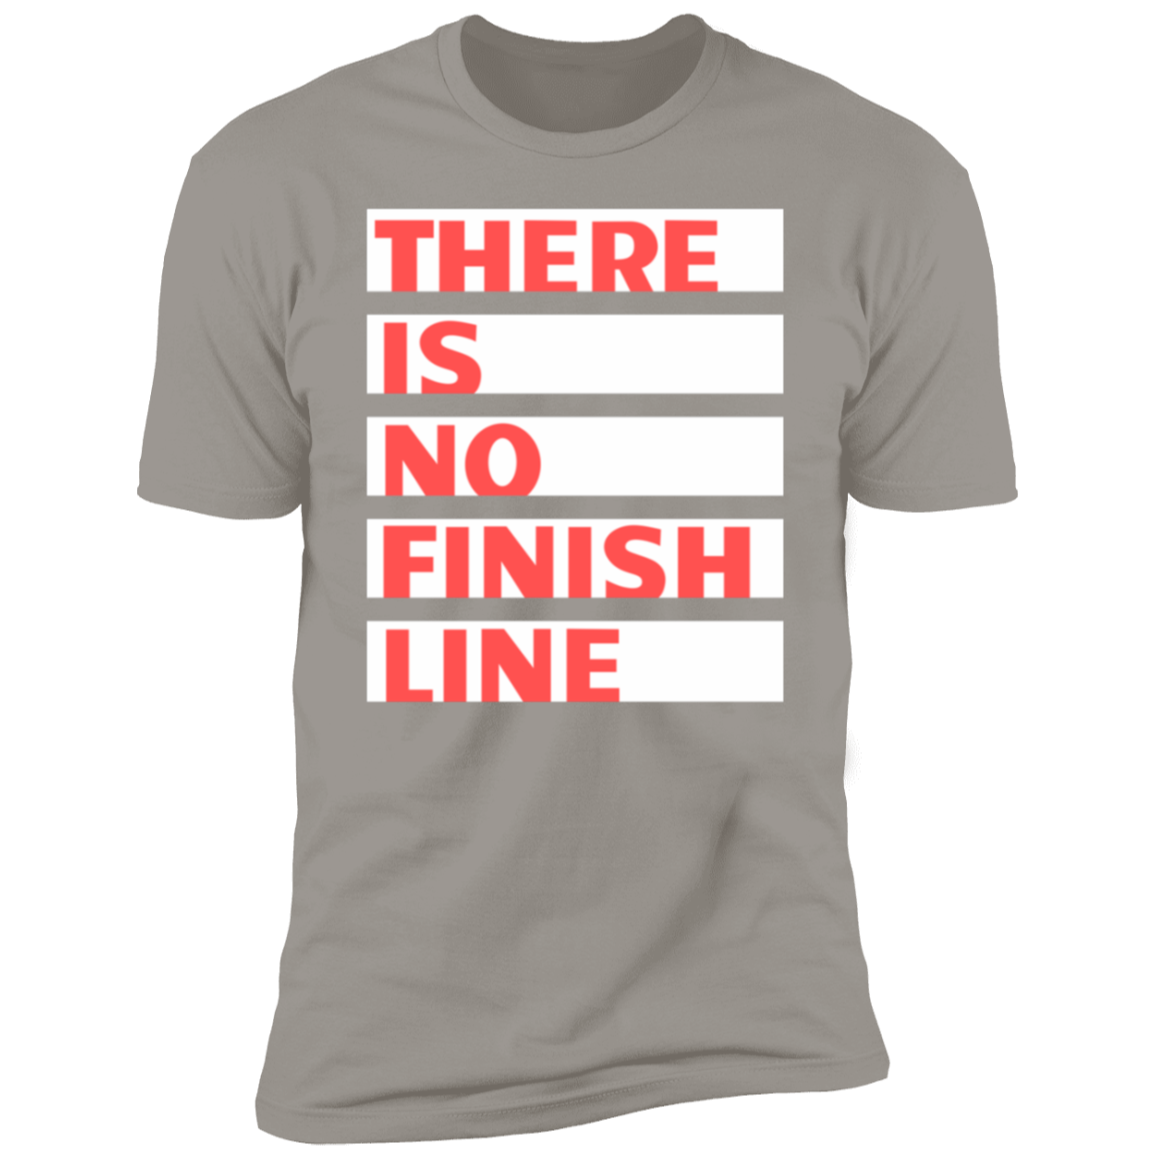 There is no finish line Premium Short Sleeve T-Shirt - Game Day Getup